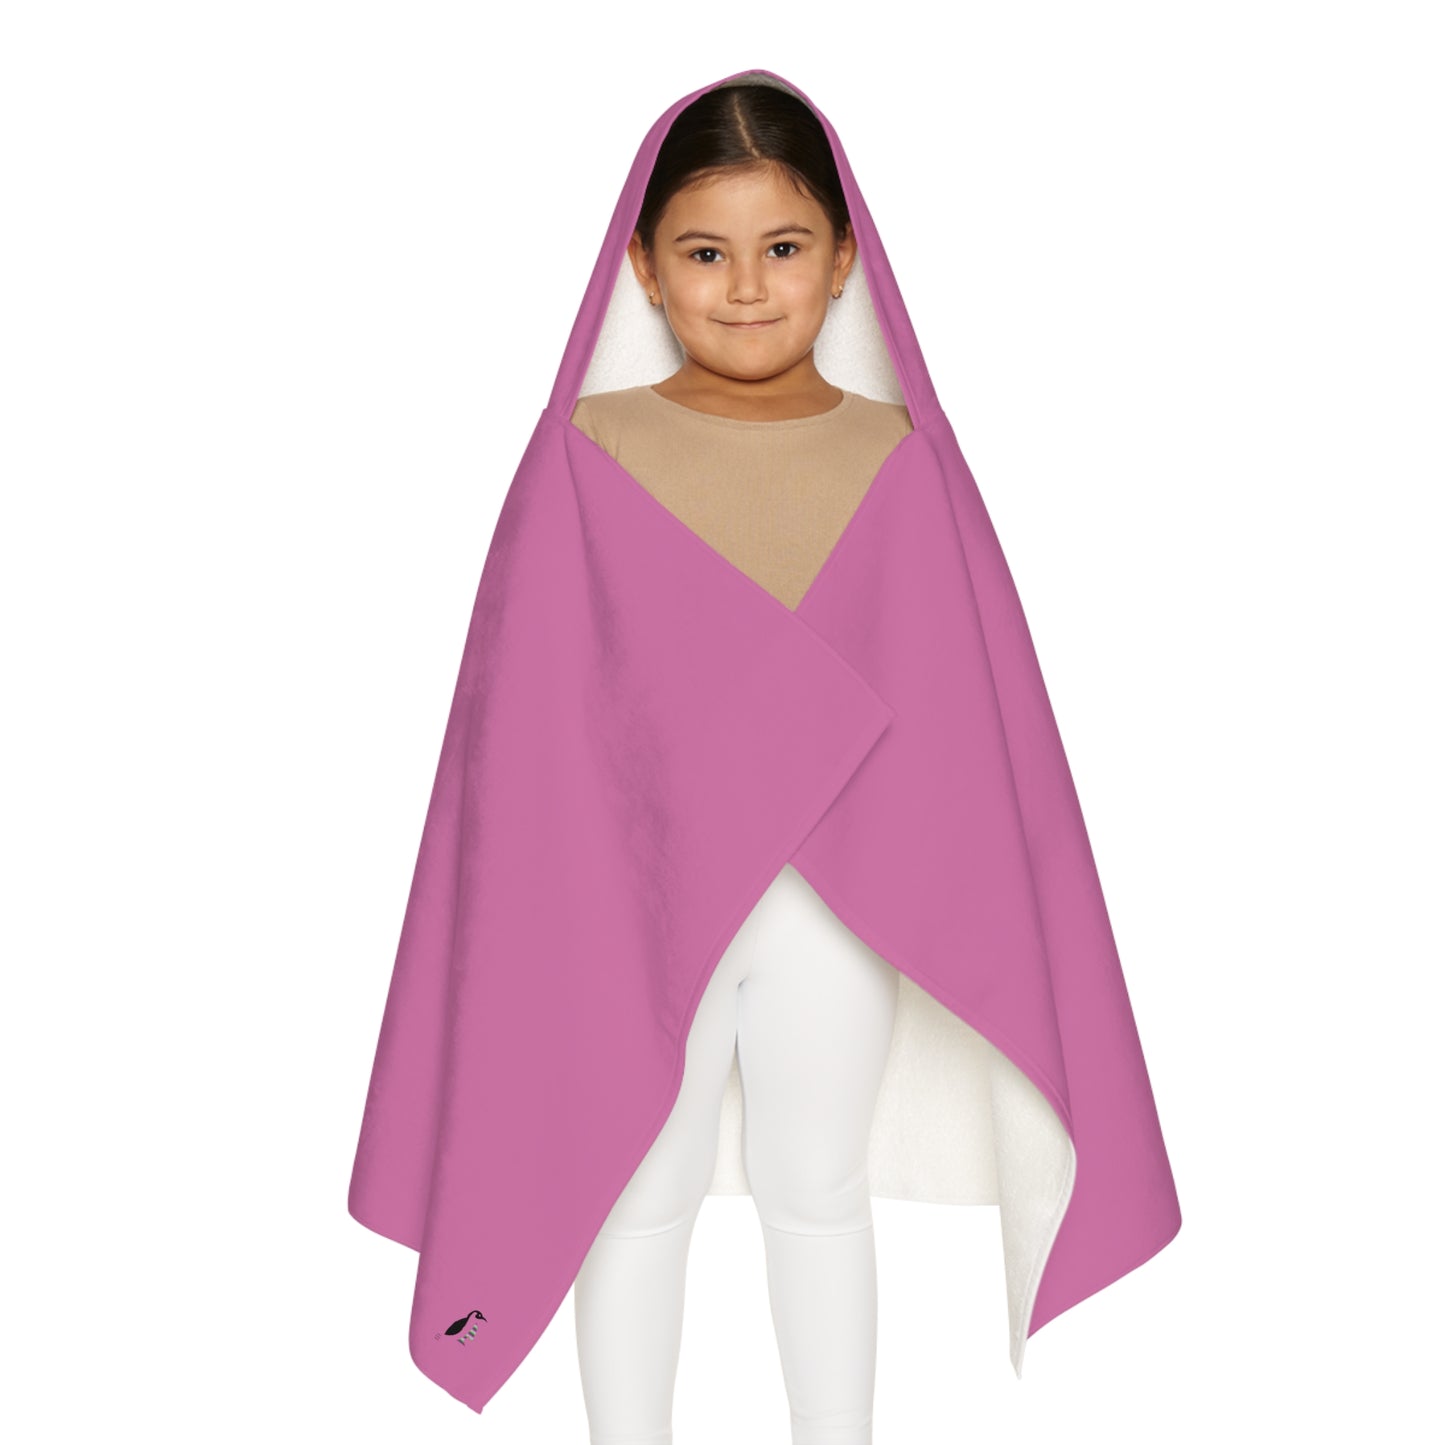 Youth Hooded Towel: Fight Cancer Lite Pink